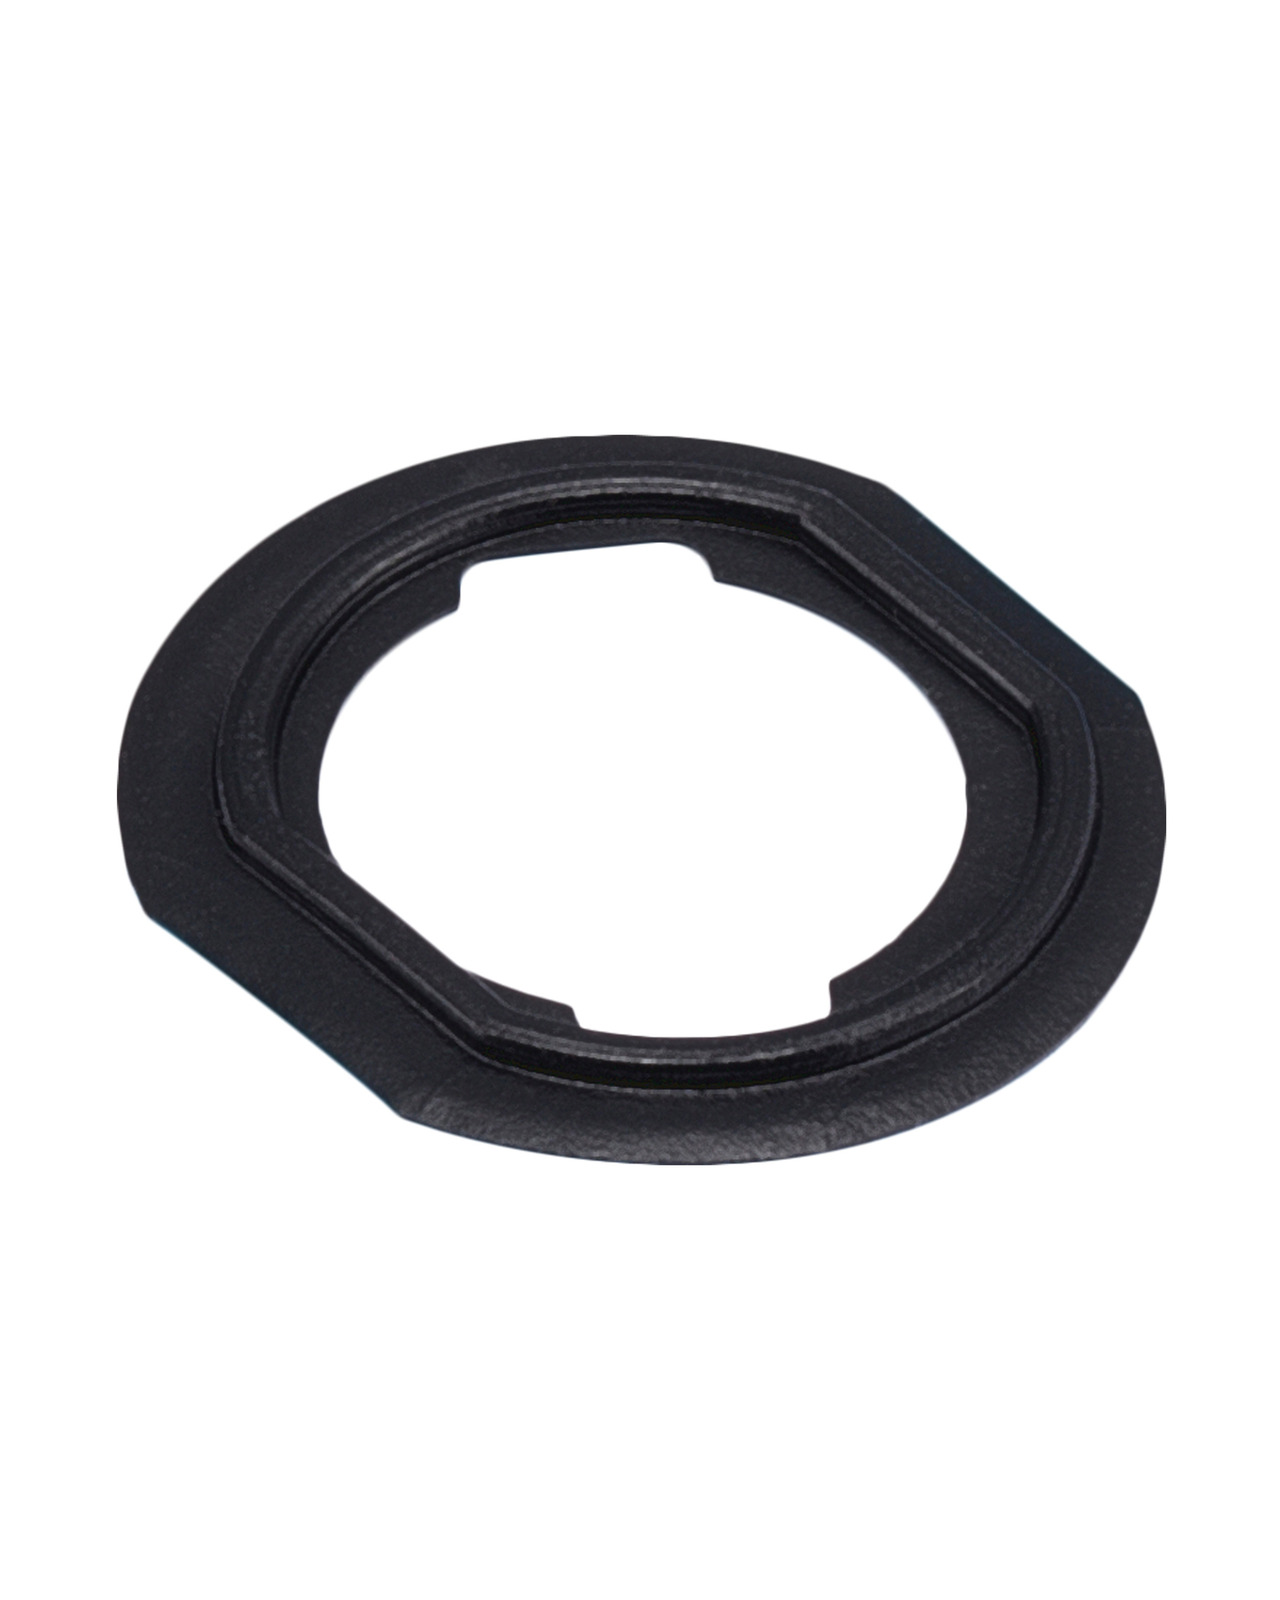 Home Button Rubber Gasket iPad 5/6/7/8/9 - 10Pk